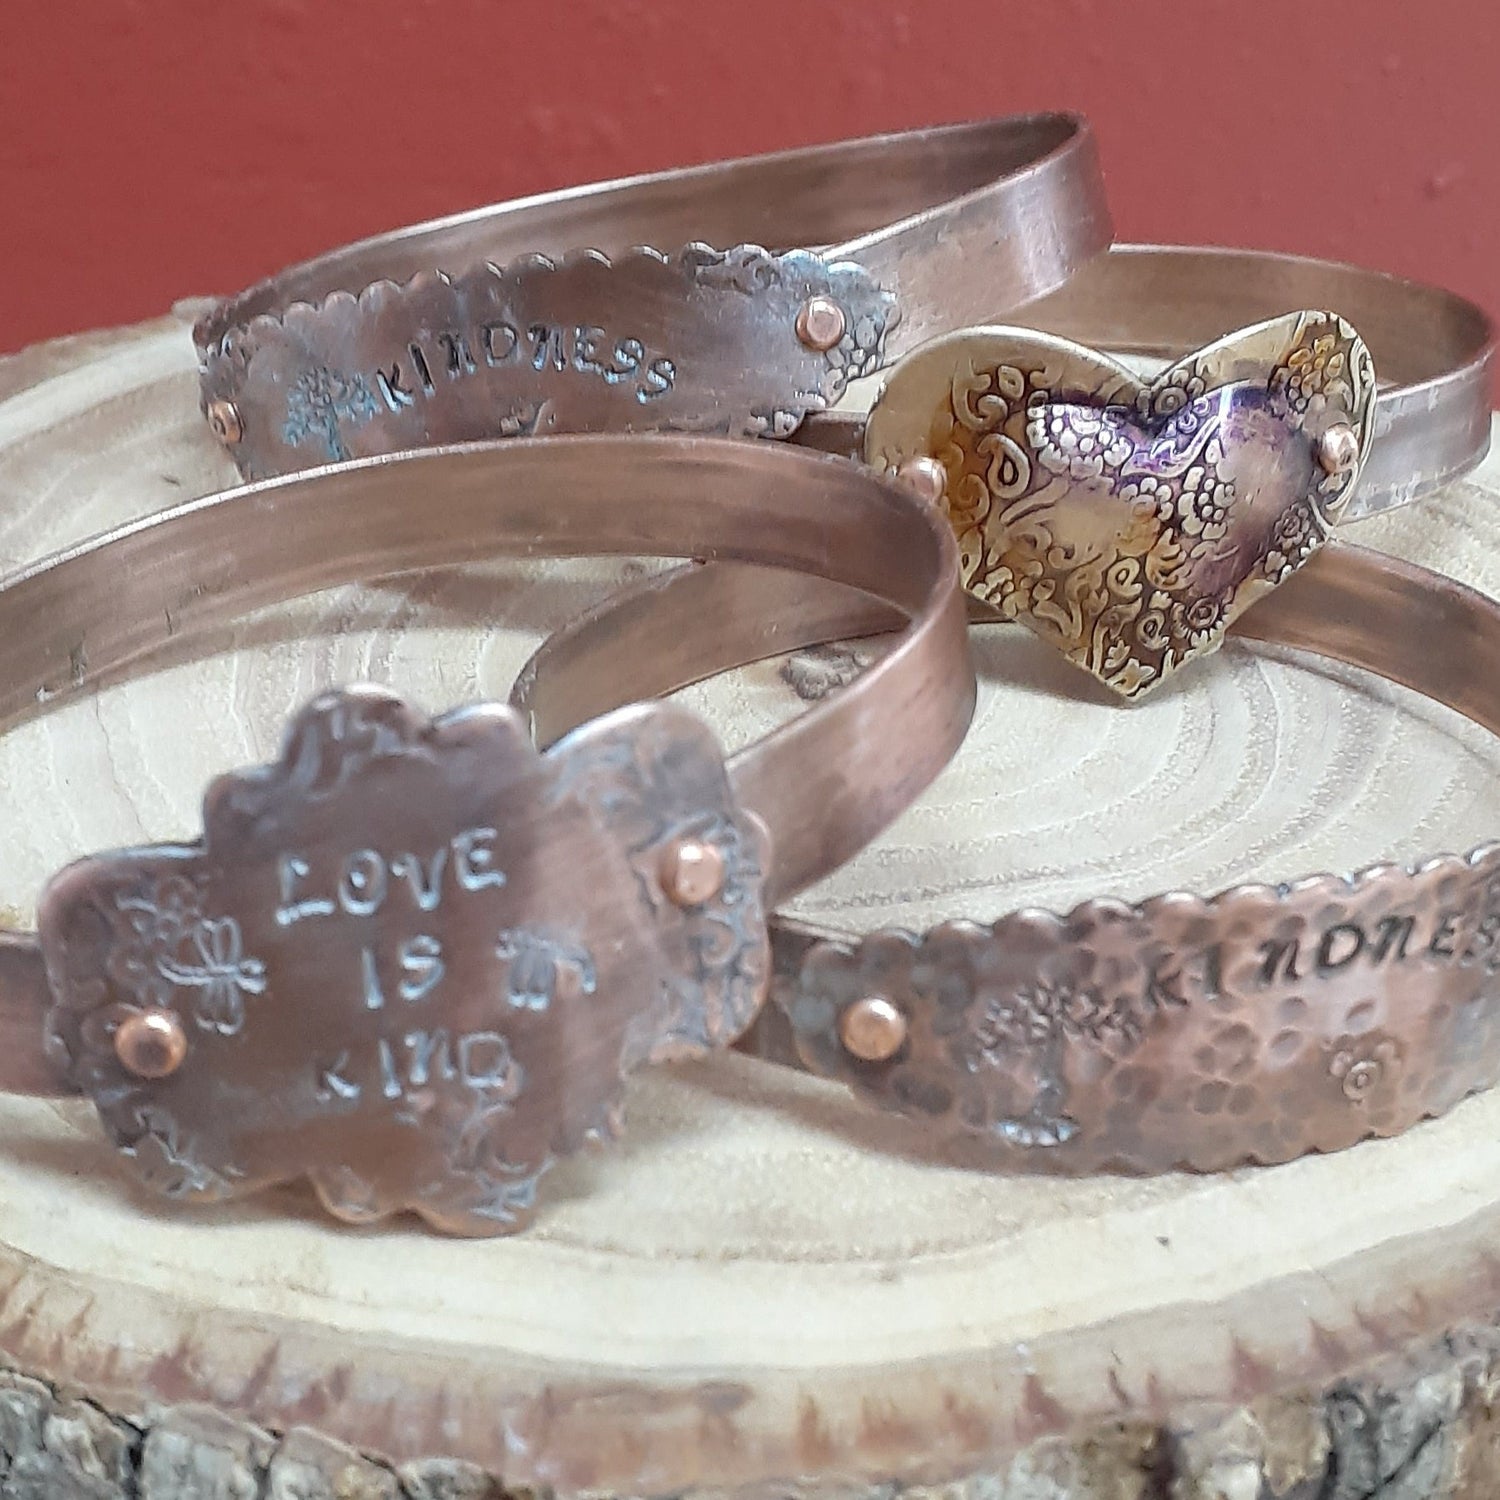 Wholesale copper inspirational bracelets with display |WRD - WarmRainyDay